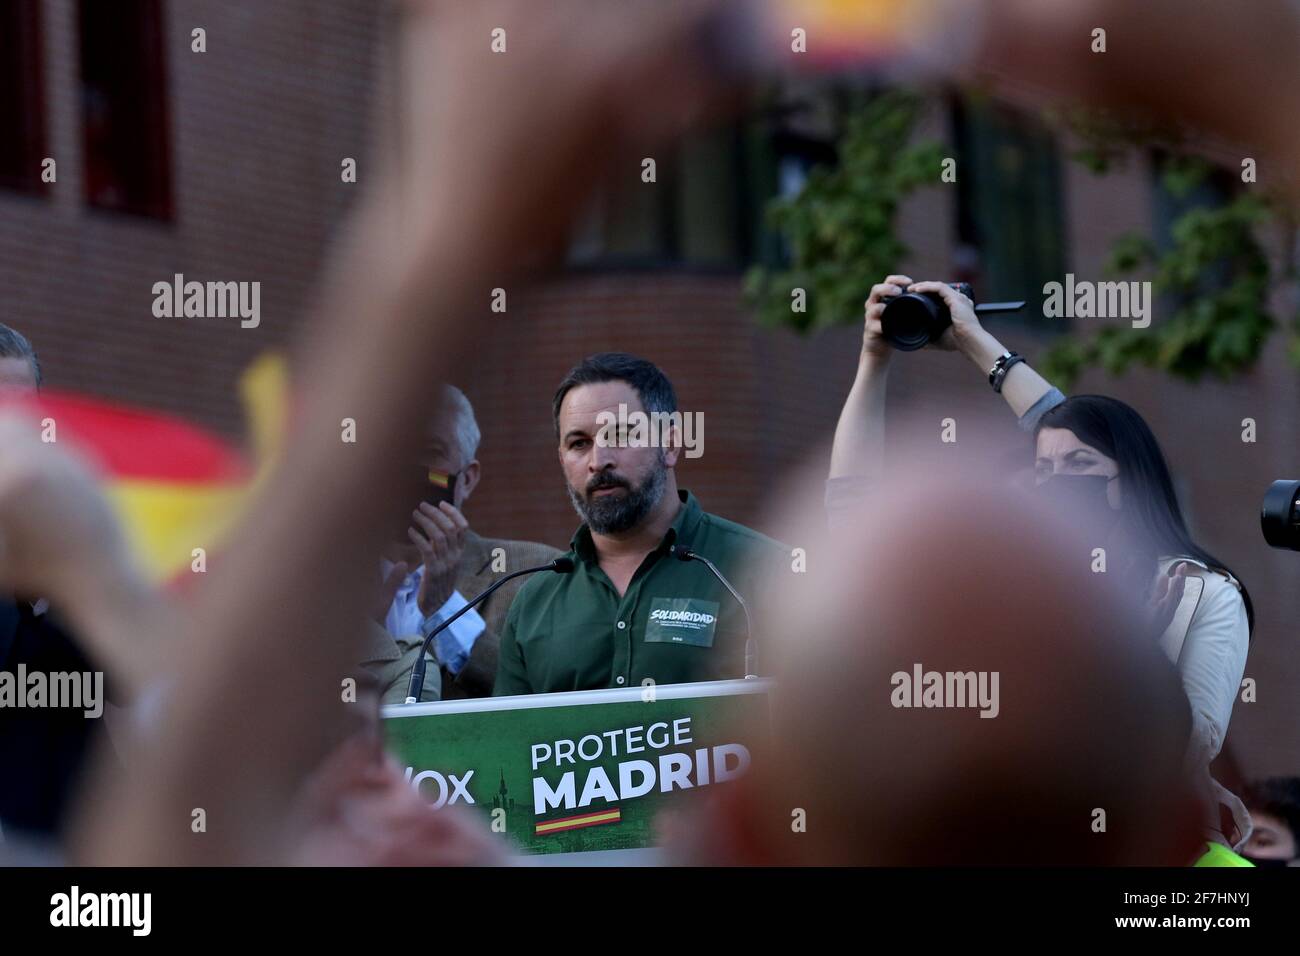 Madrid, Spain; 07.04.2021.- Santiago Abascal leader of VoxVox carries out its first act of electoral pre-campaign in Madrid in the working-class neighborhood of Vallecas. The National Police clash against residents of the Madrid neighborhood, who were protesting the pre-campaign act of the far-right party. The party's leader, Santiago Abascal, interrupted his rally and confronts several participants in the protests. Vox had gathered three hundred attendees in the popularly called 'Red Square' of Vallecas, separated by a narrow police cordon, the residents of the neighborhood chanted shouts of Stock Photo